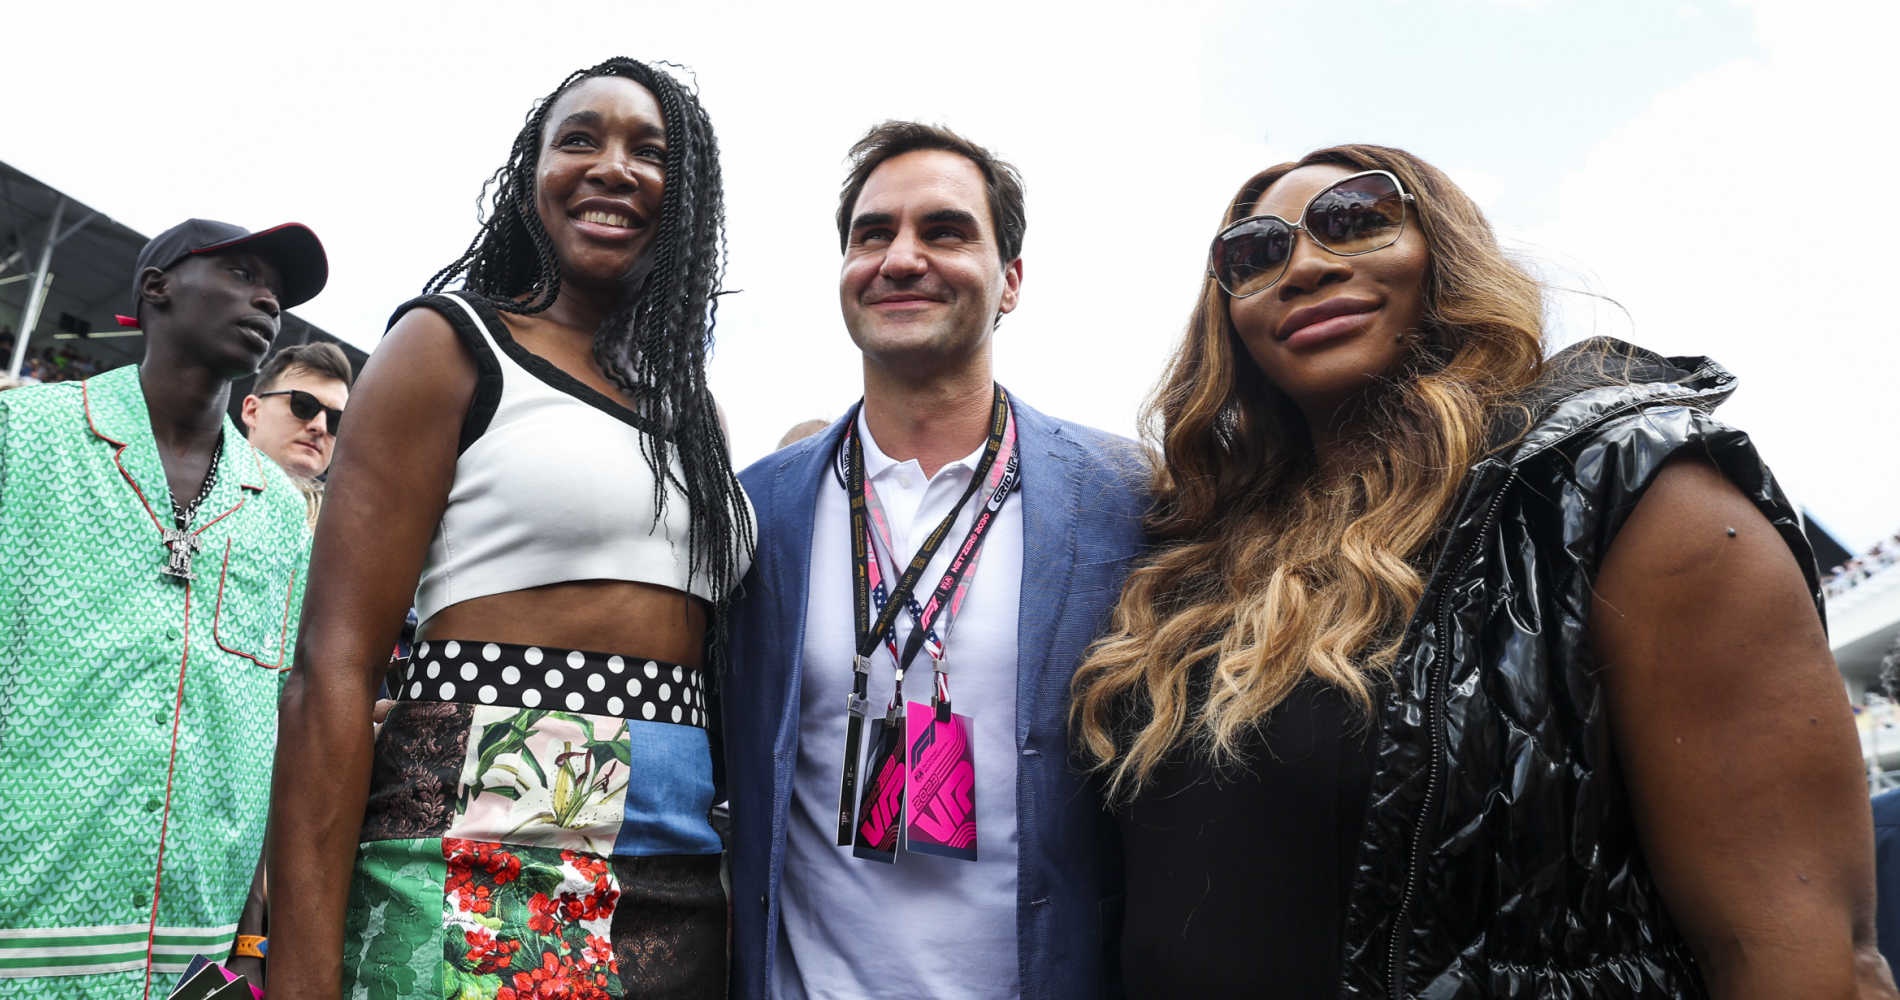 Federer and Williams sisters spotted in Miami Tennis Majors